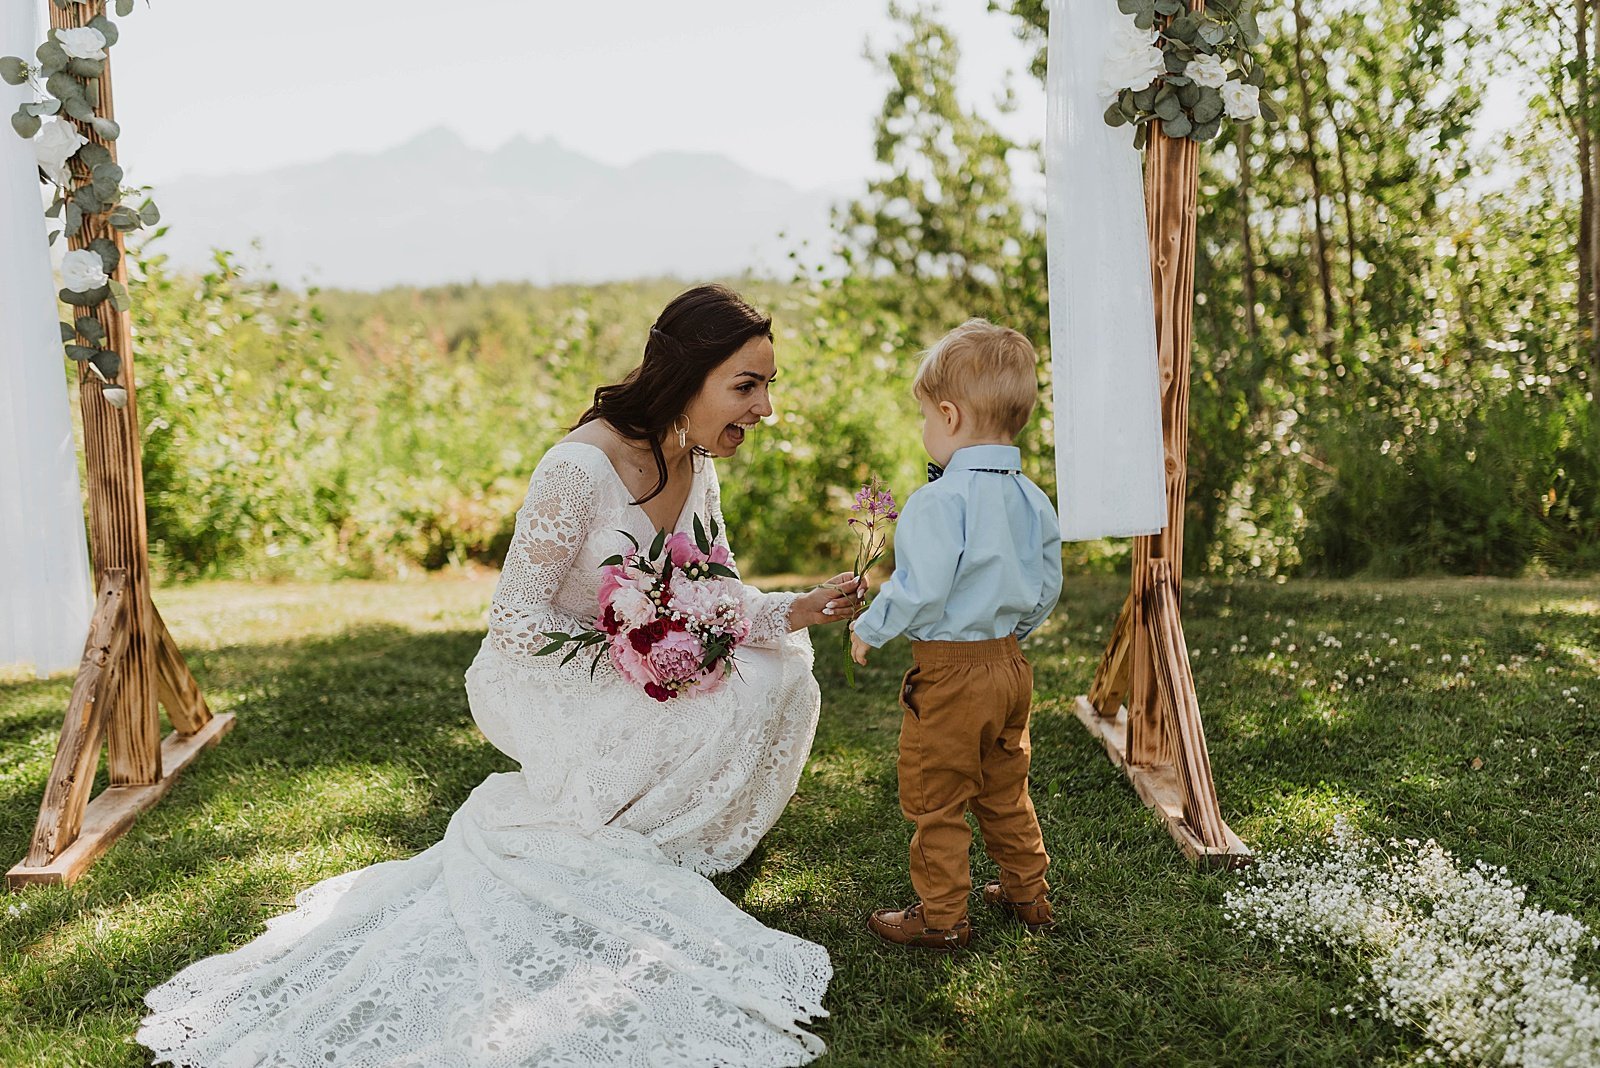  Bride greeting toddler boy guest by photographer, Theresa McDonald.  